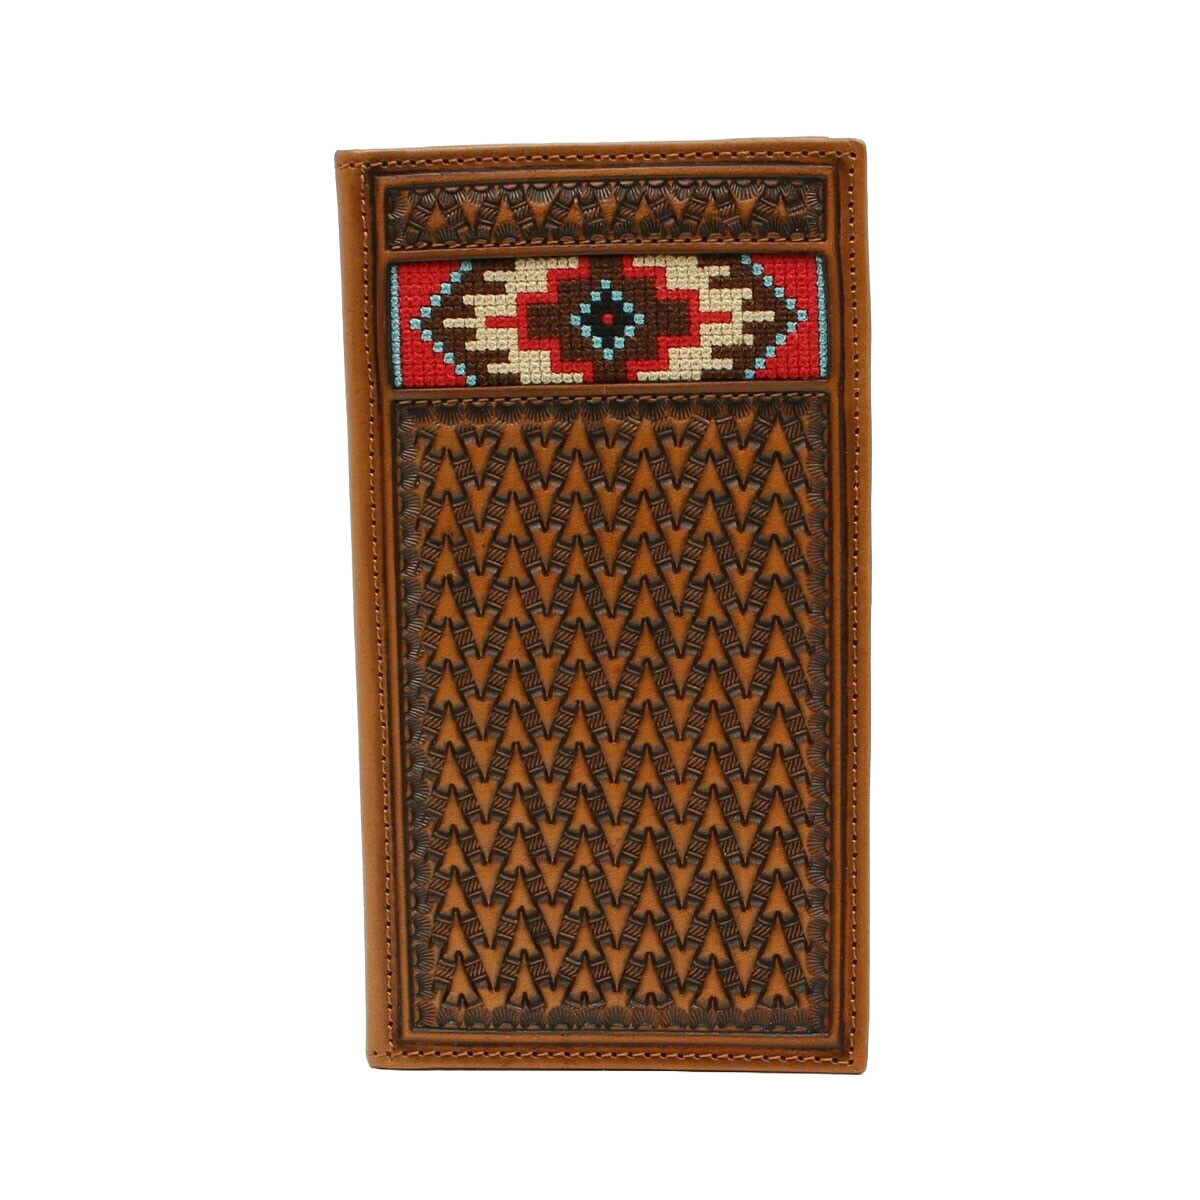 Ariat Tan Embroidered Bi-fold Rodeo Wallet w/ Aztec Inlay A3543408